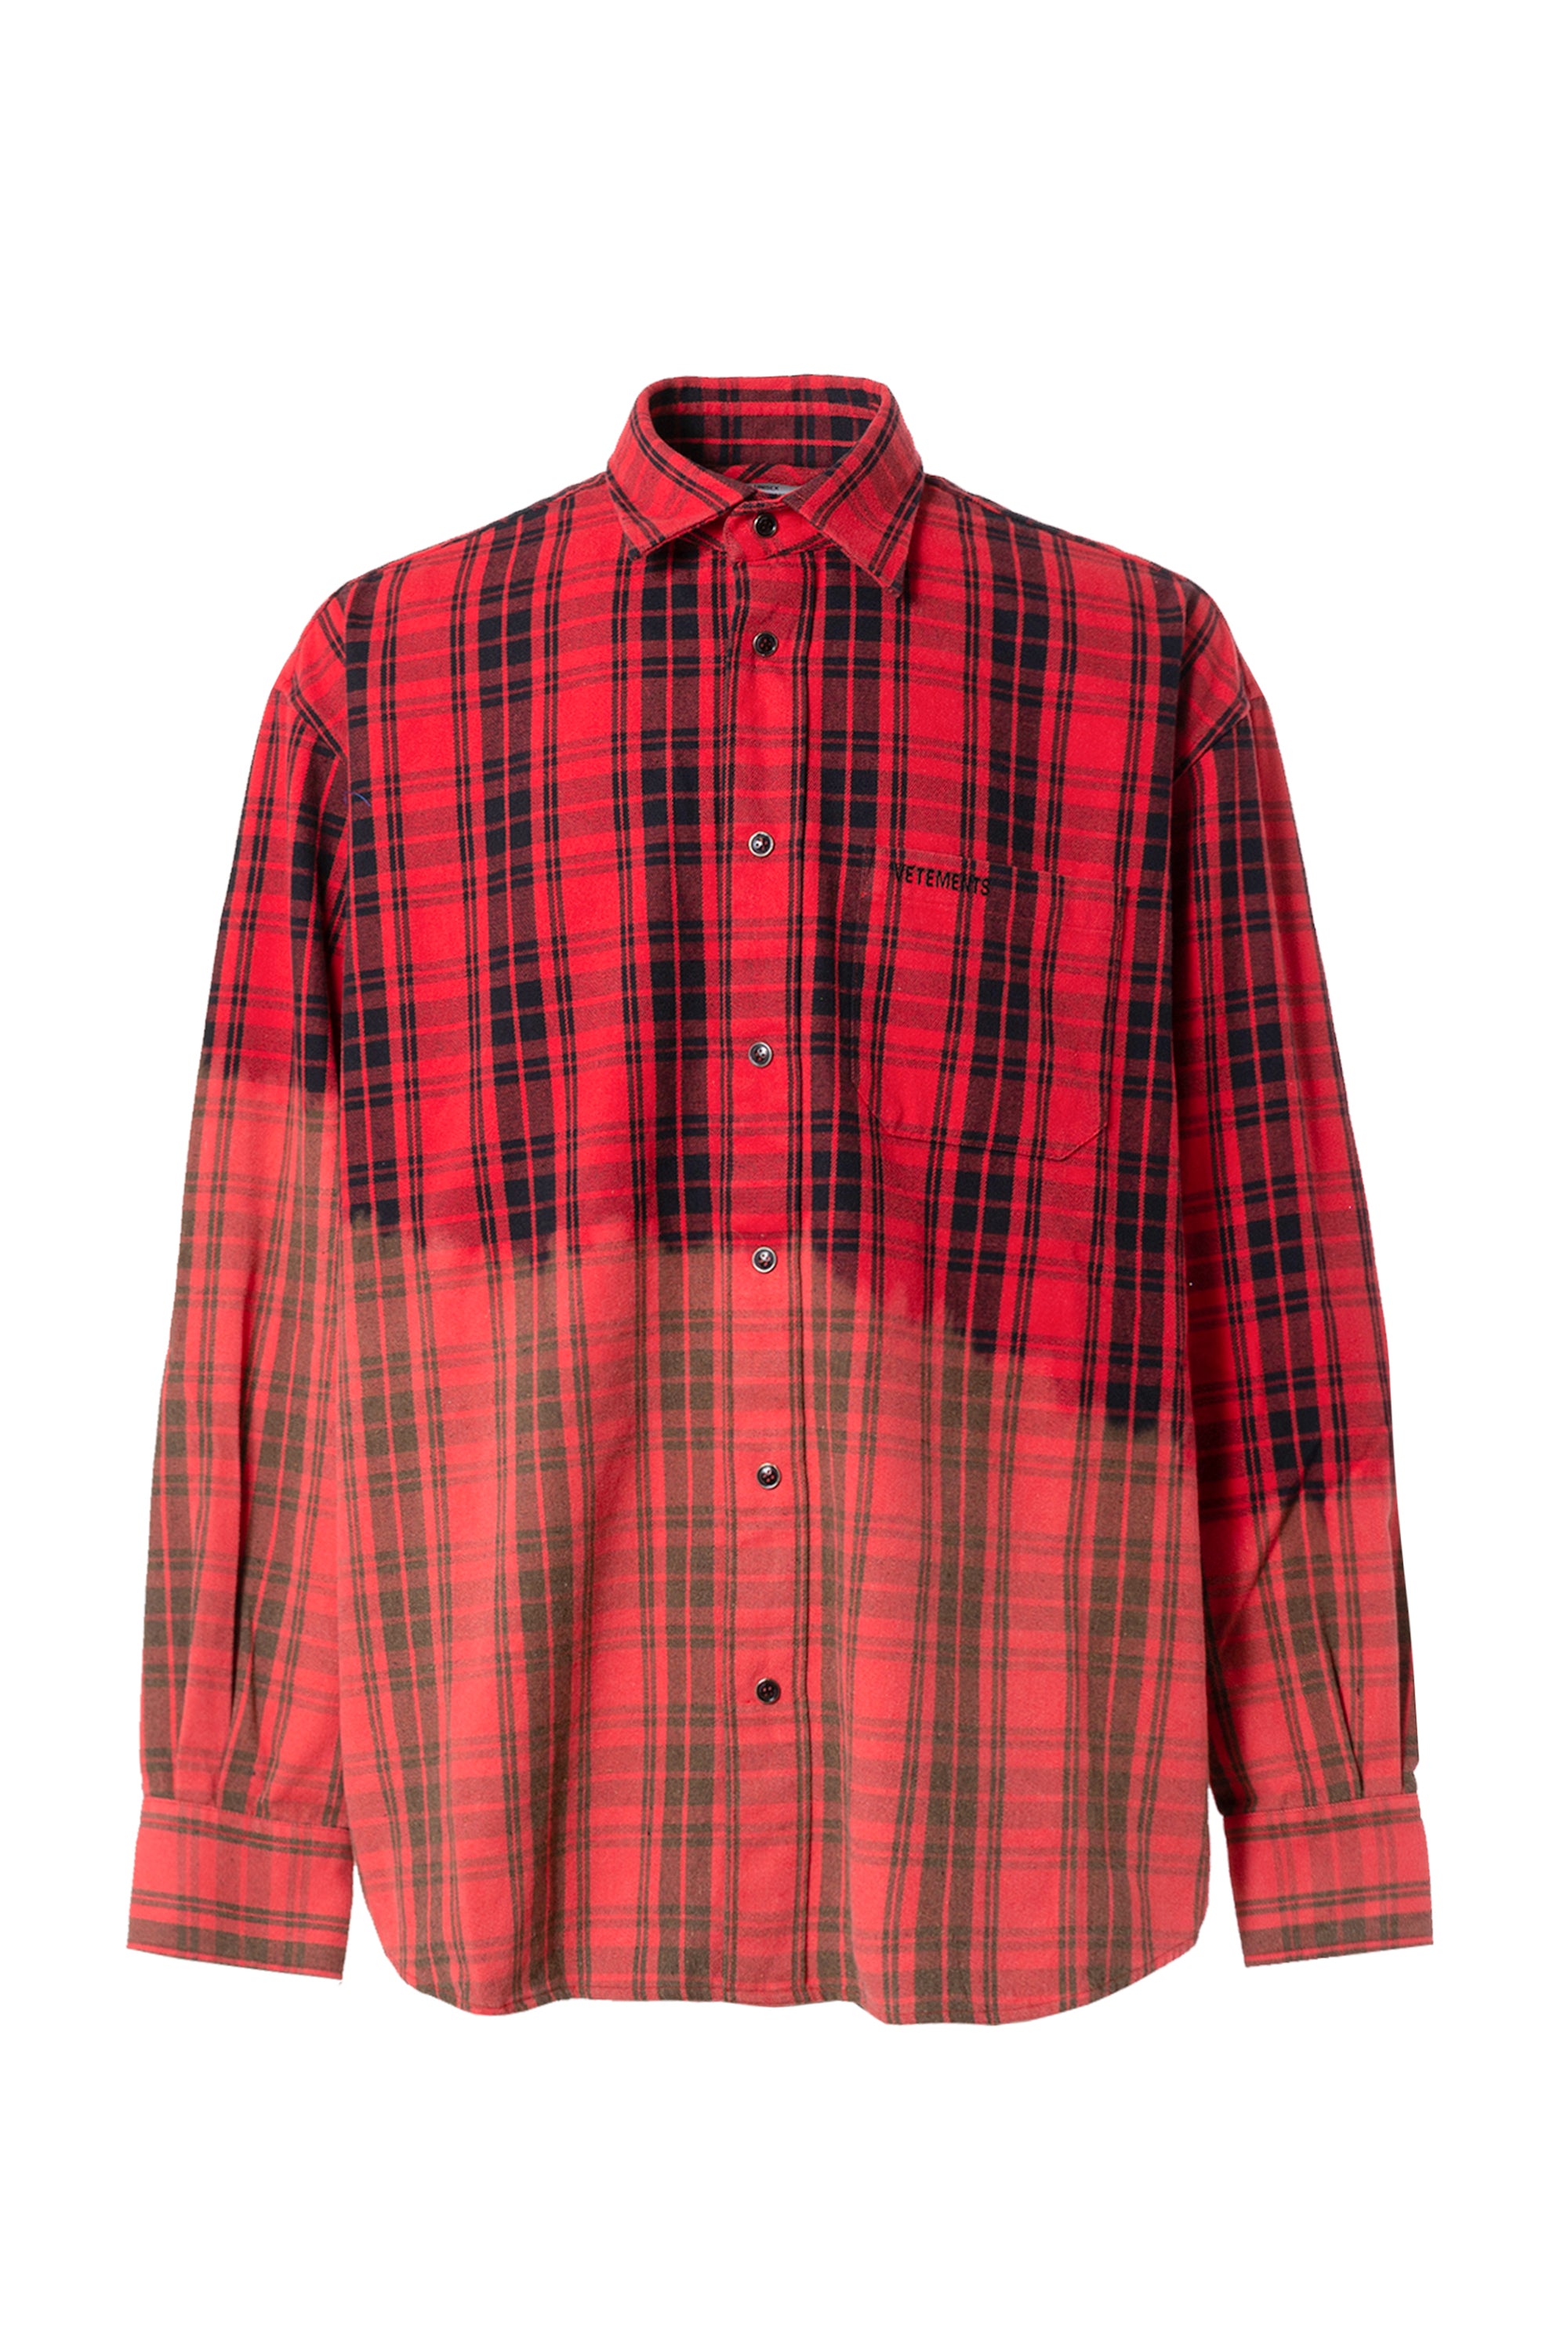 VETEMENTS SS23 BLEACHED FLANNEL SHIRT / RED -NUBIAN